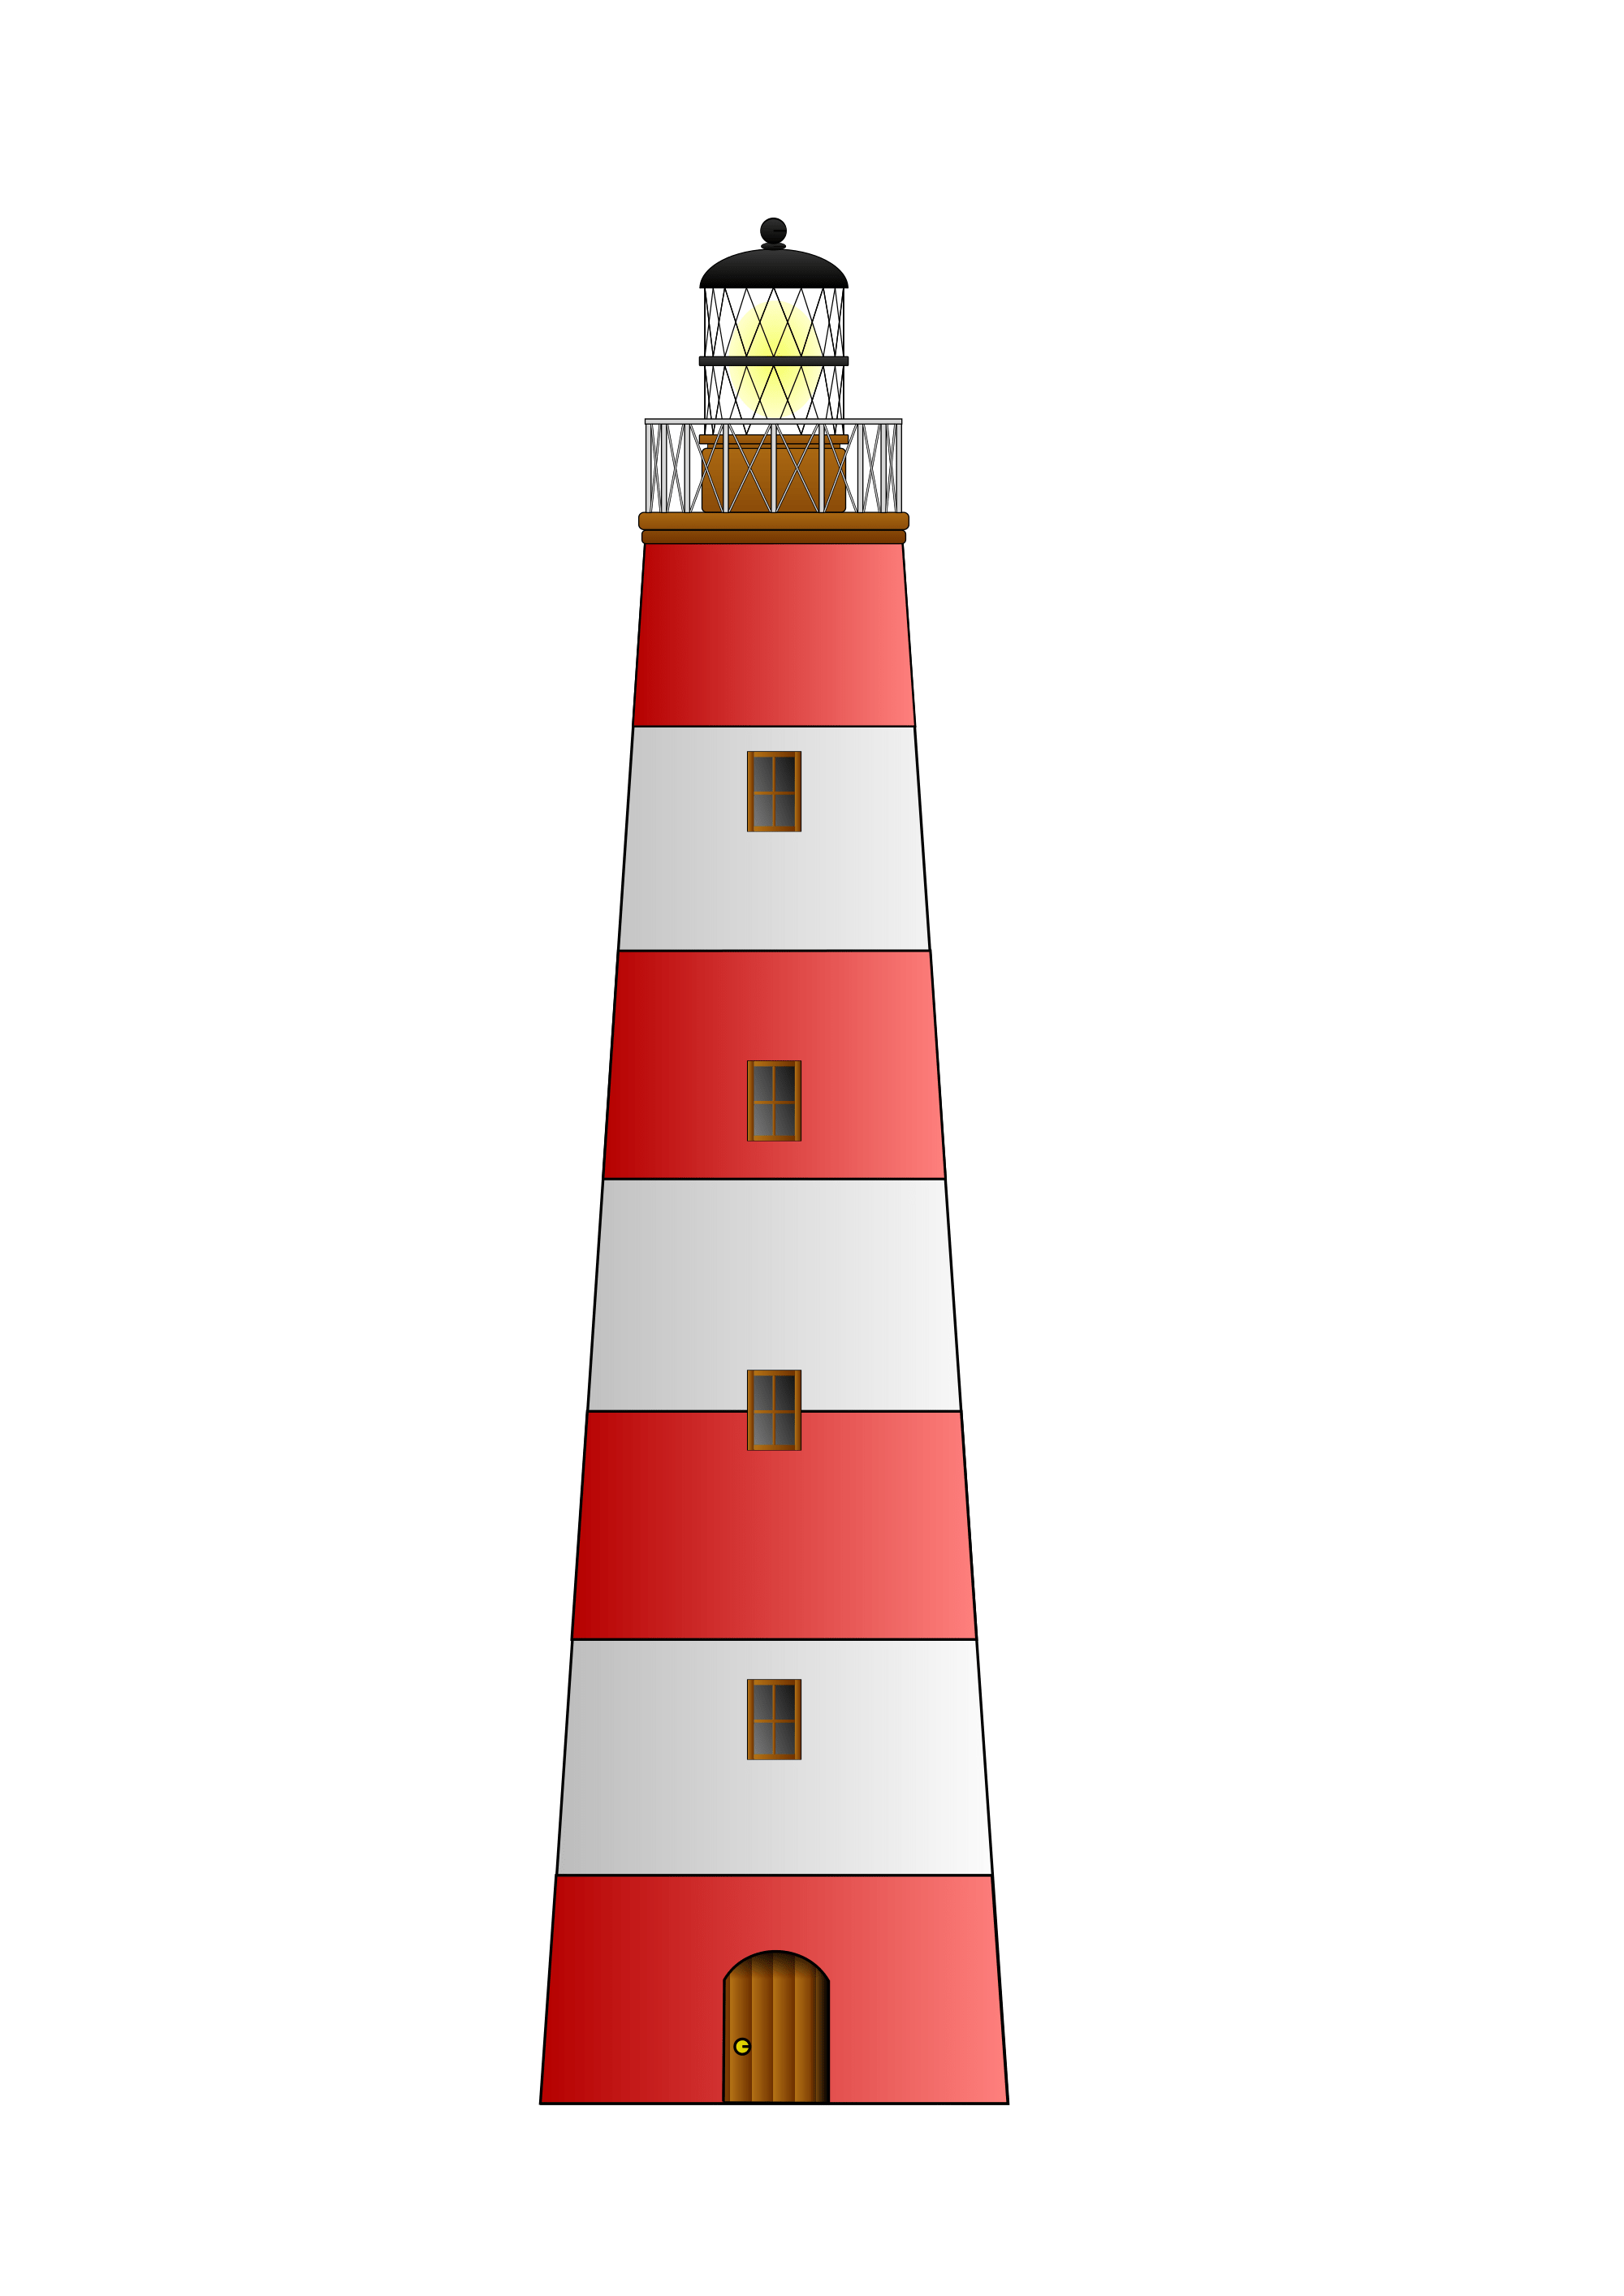 Light house png, Light house png Transparent FREE for.